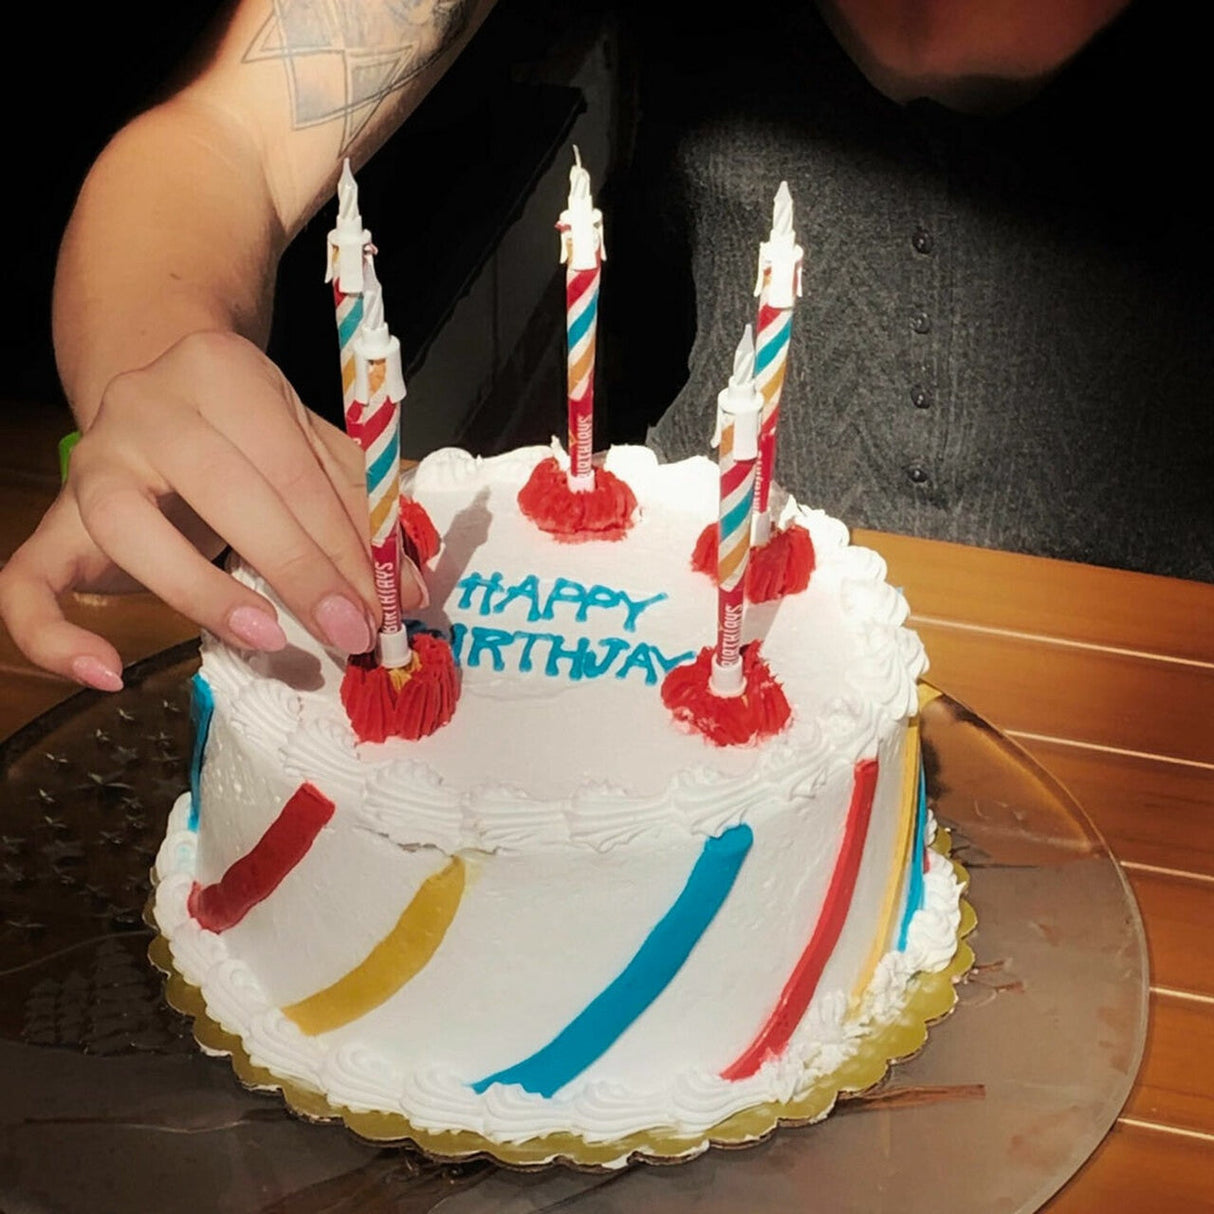 Close-up of a birthday cake with BirthJays joint holders as candles, ready for celebration